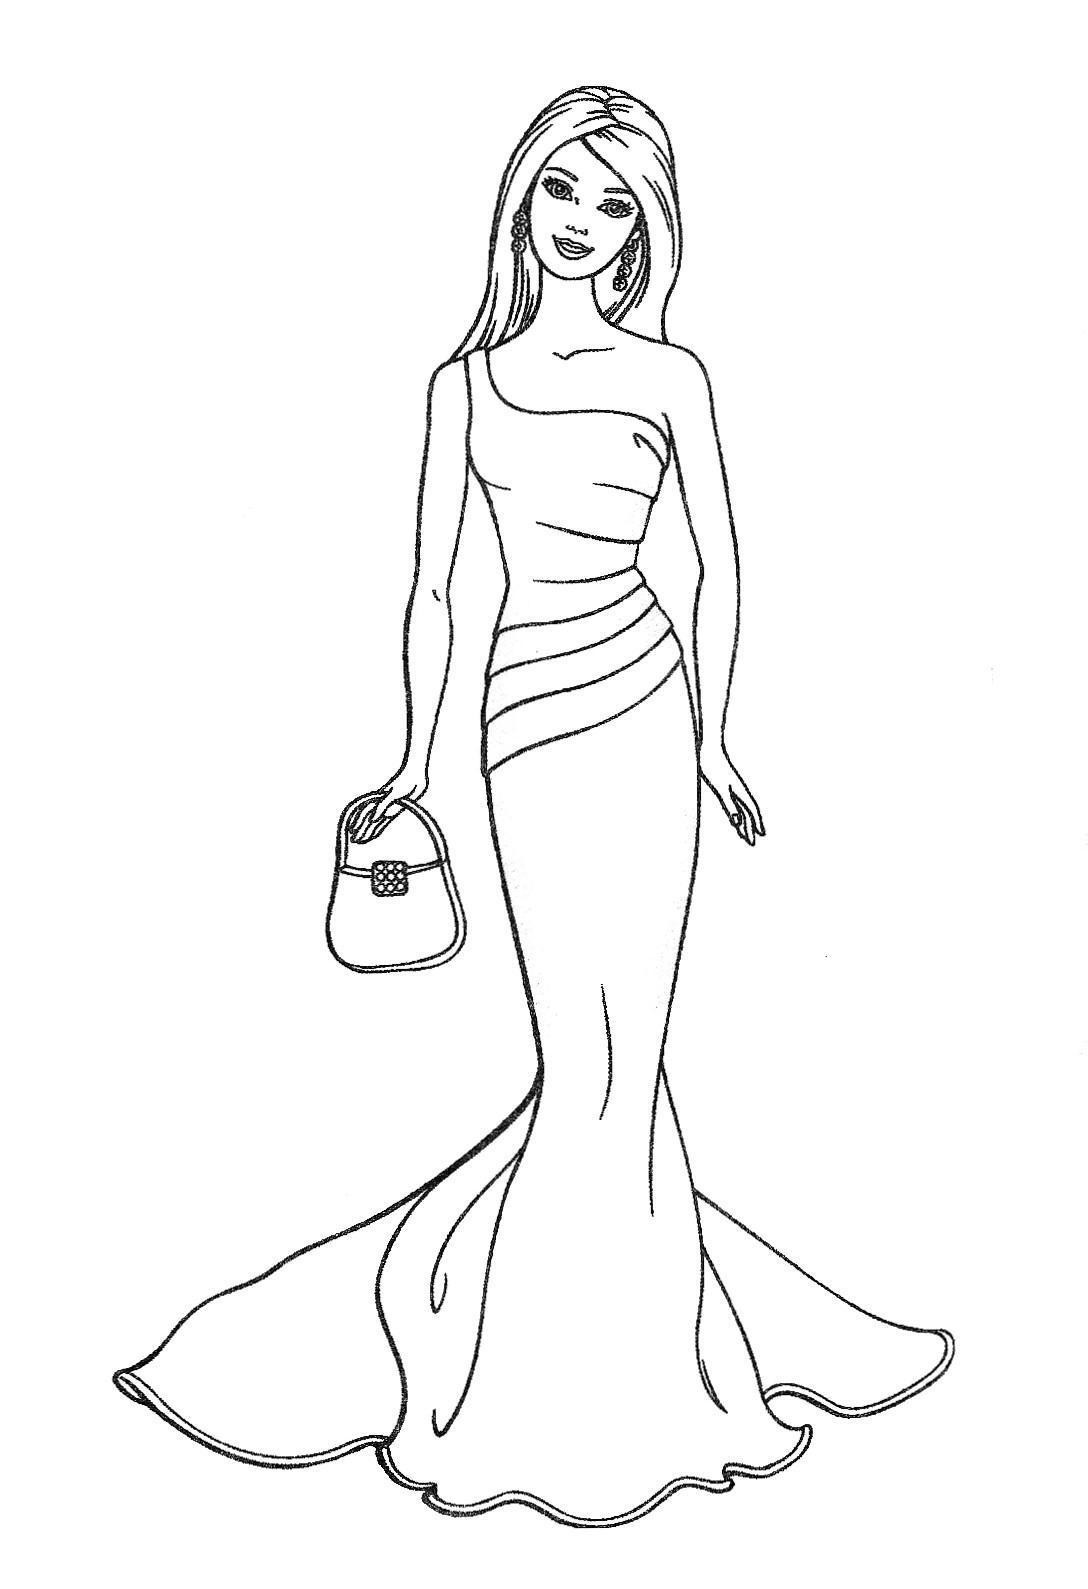 Princess Coloring Sheets For Girls
 princess coloring pages for girls Free